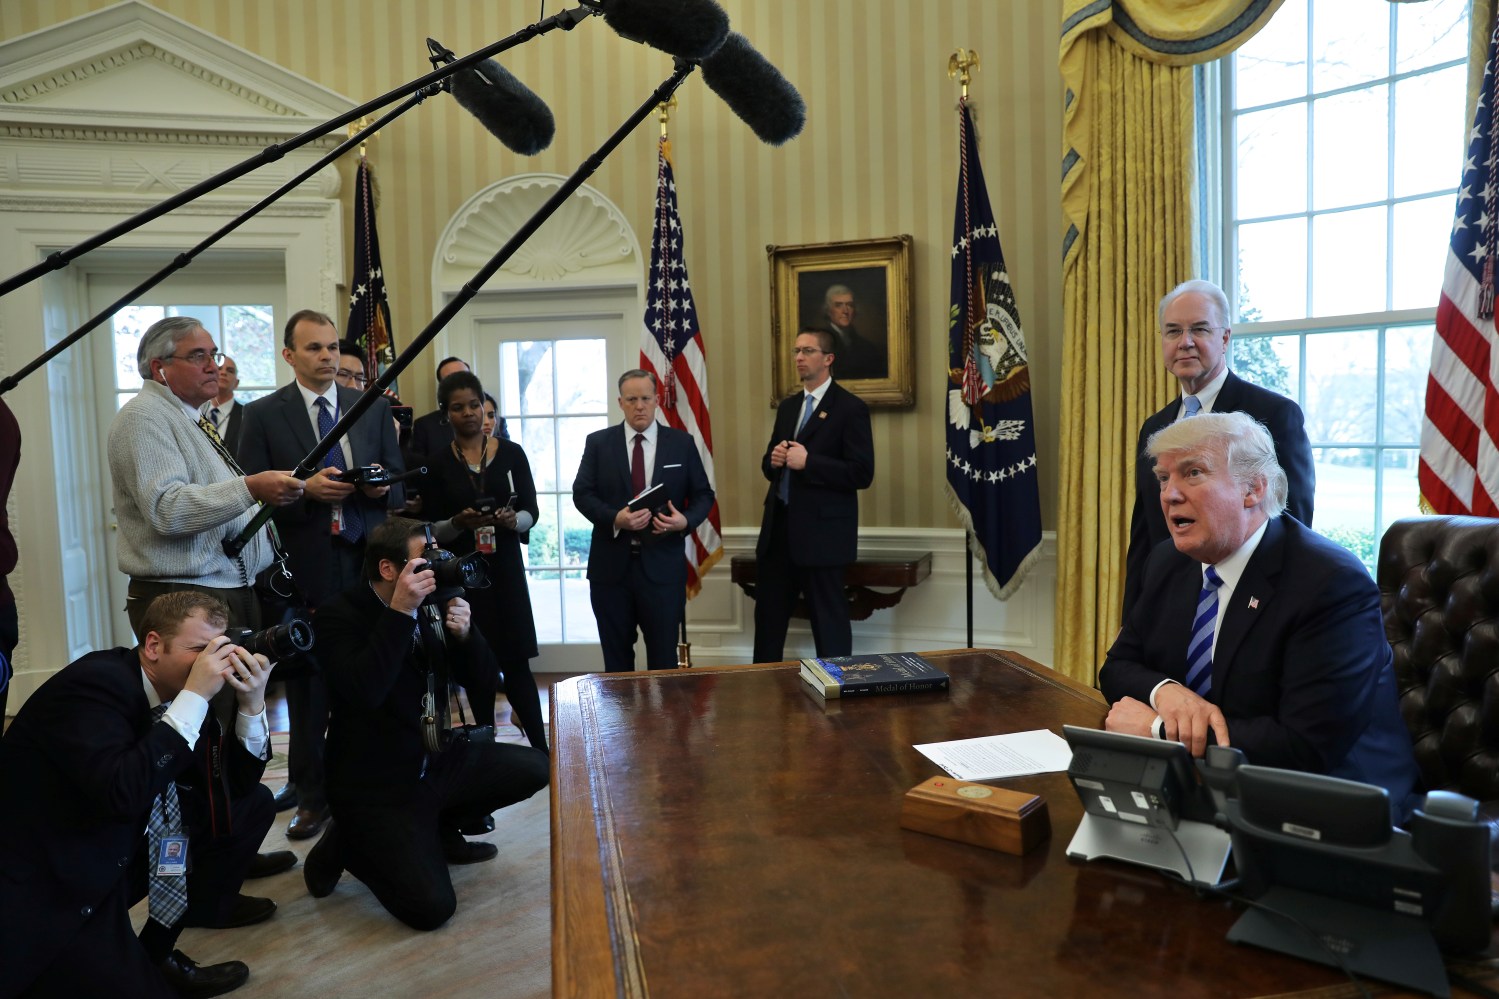 U.S. President Donald Trump talks to journalist at the Oval Office of the White House after the AHCA health care bill was pulled before a vote, accompanied by U.S. Health and Human Services Secretary Tom Price (2nd R) and Vice President Mike Pence (not pictured), in Washington, U.S., March 24, 2017. REUTERS/Carlos Barria - RTX32M39